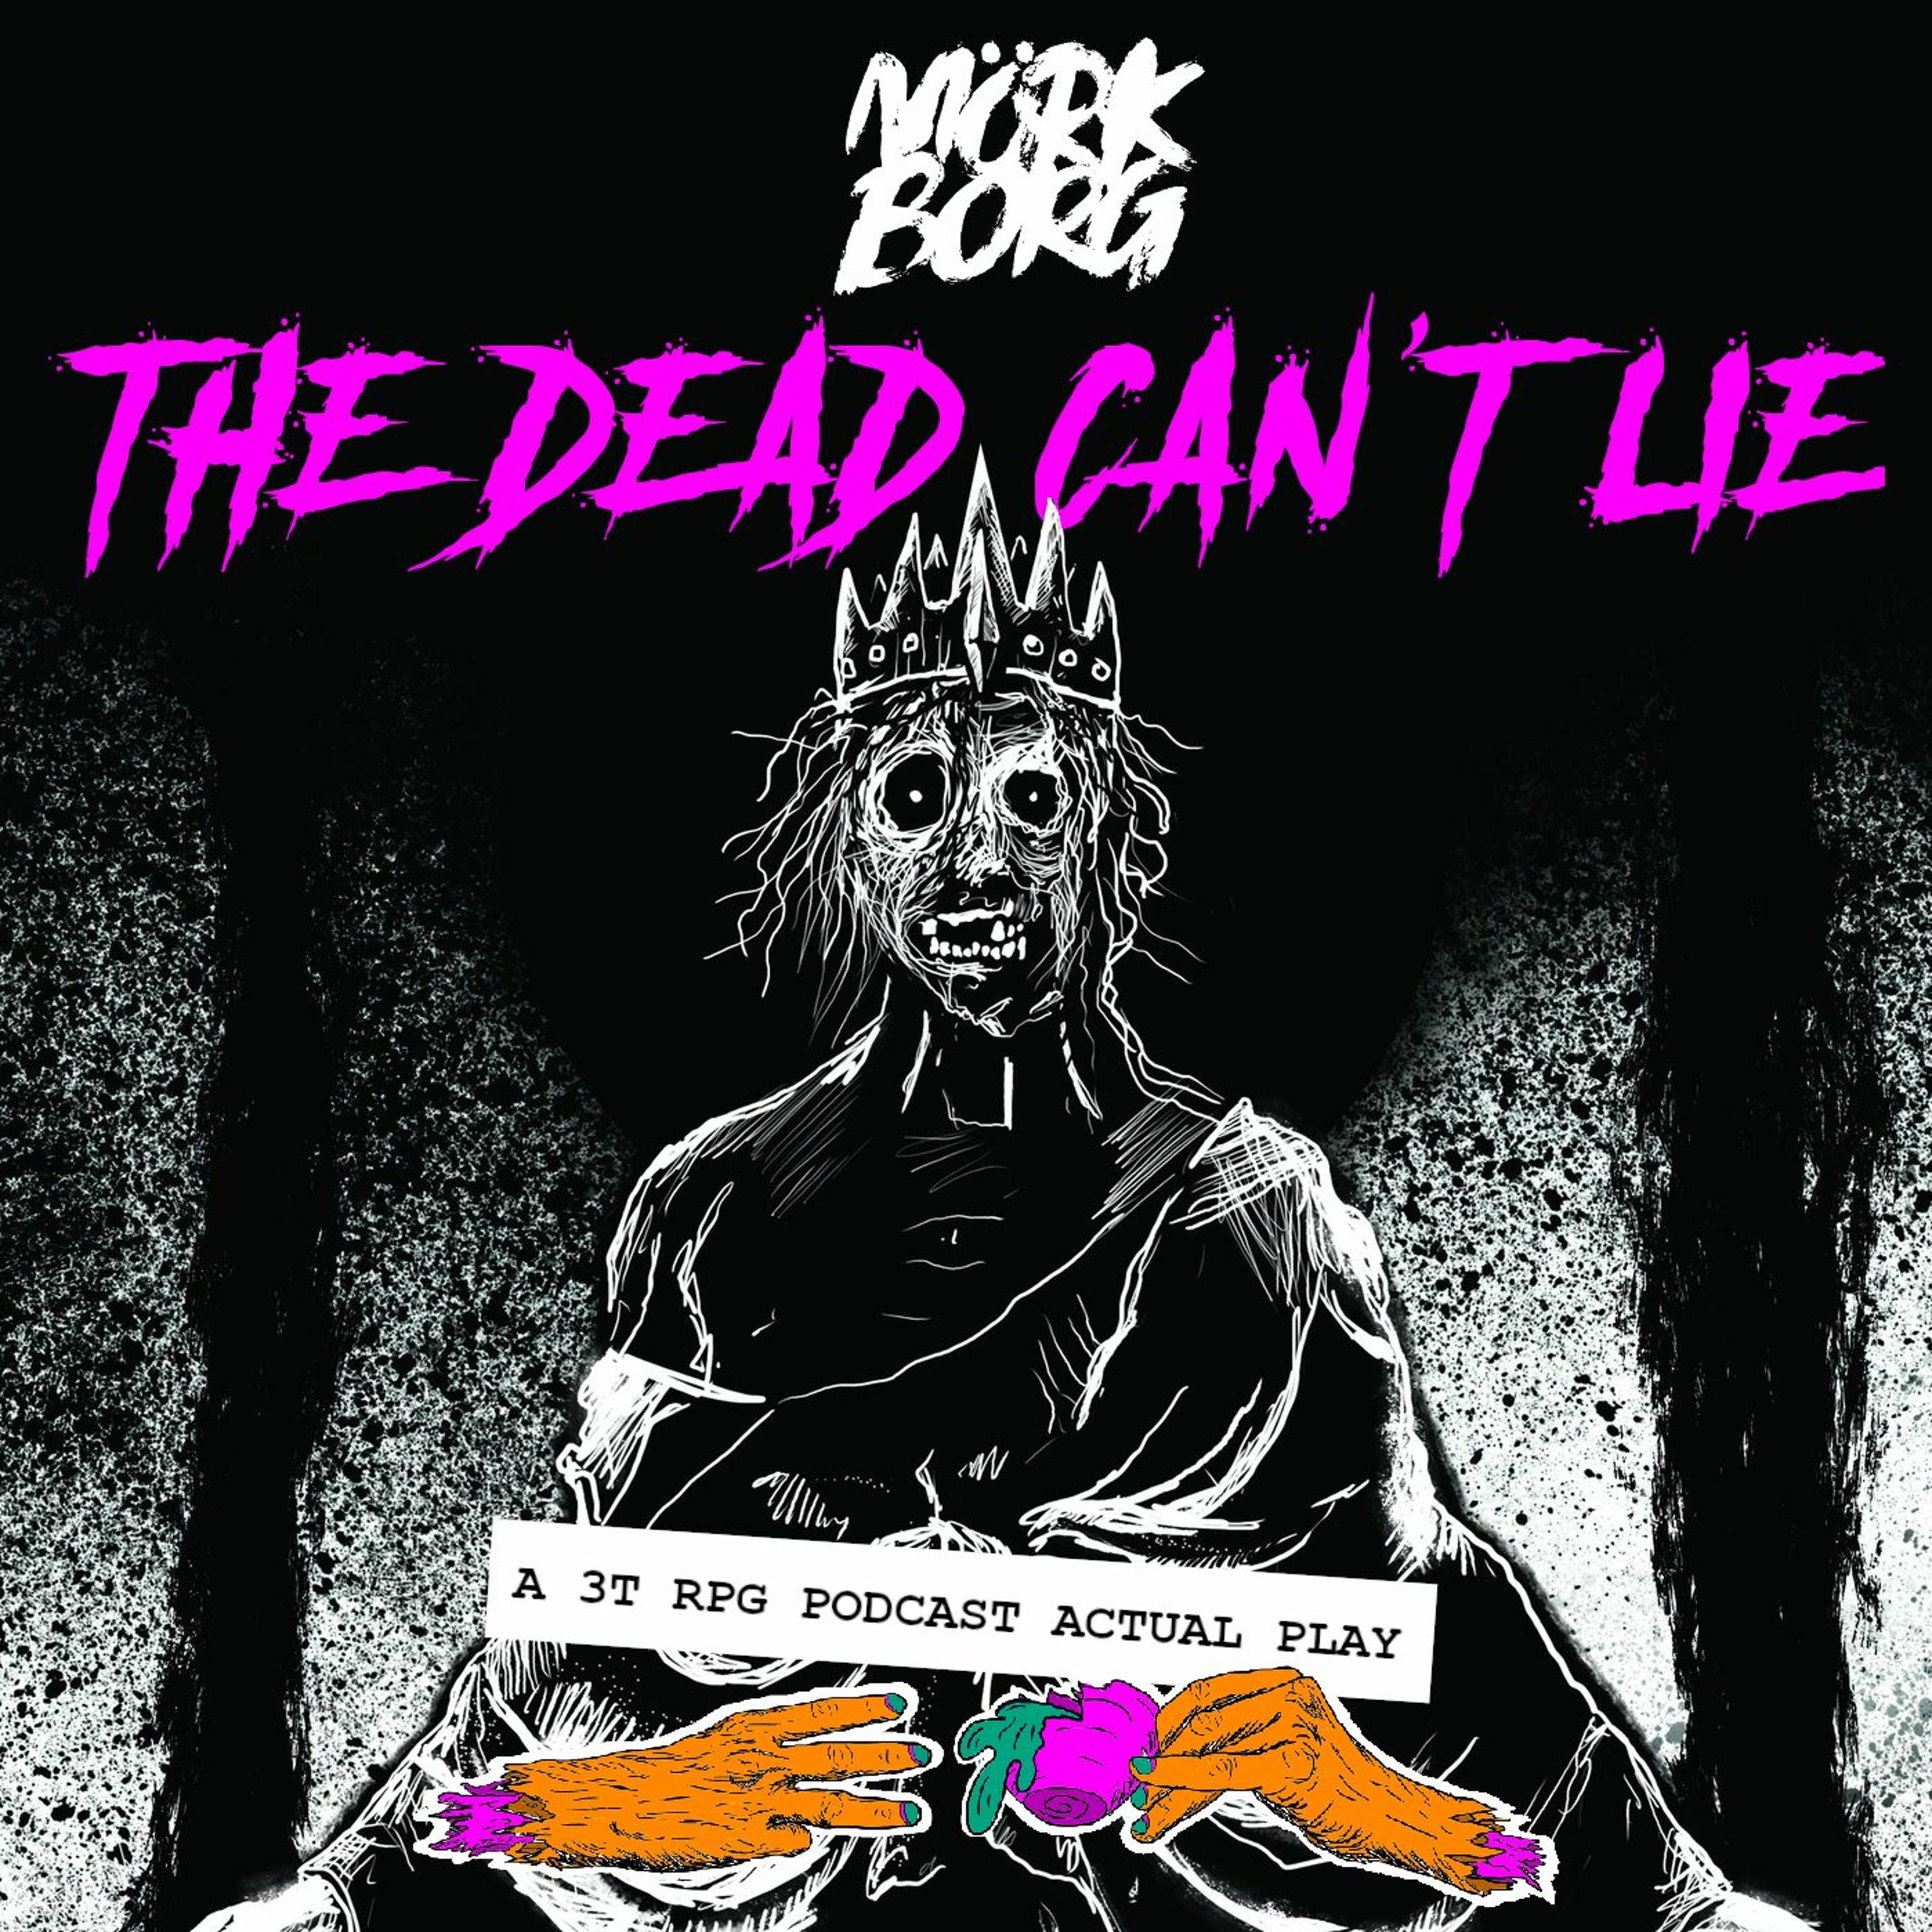 The Dead Can’t Lie 03 - The Priest [Part 2] (Mörk Borg Actual Play)